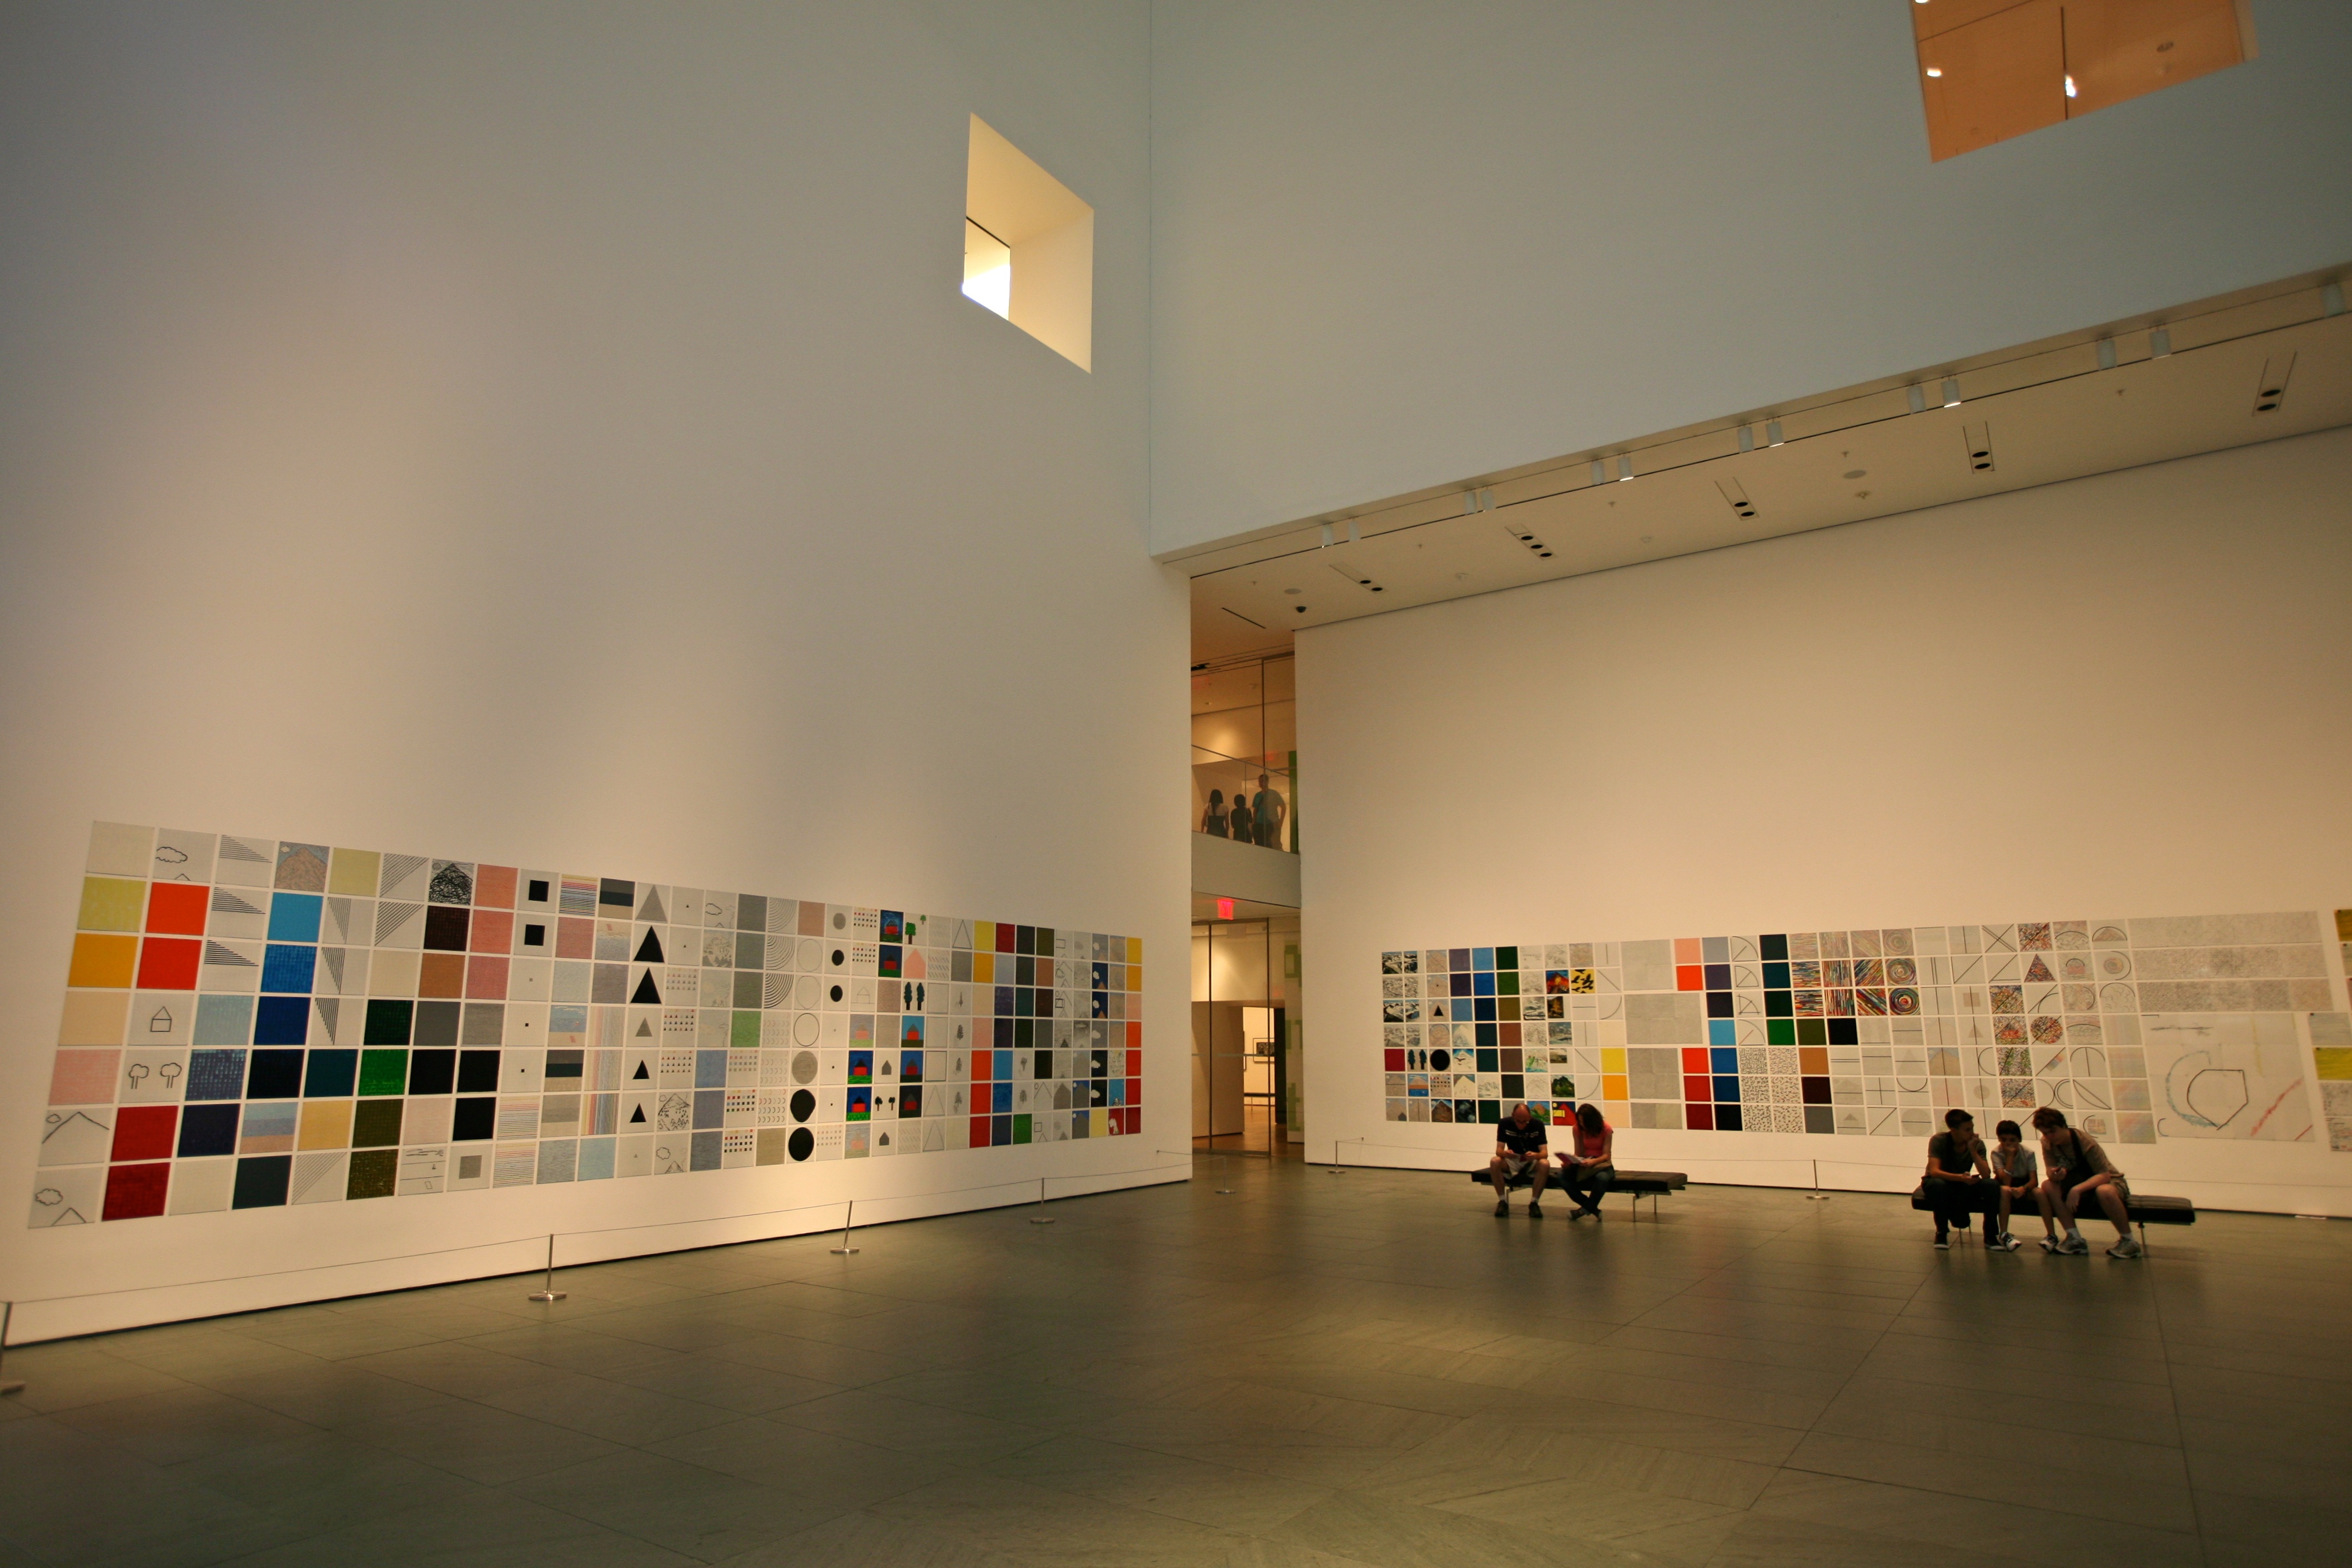 Arted States: Exhibition open at MOMA!